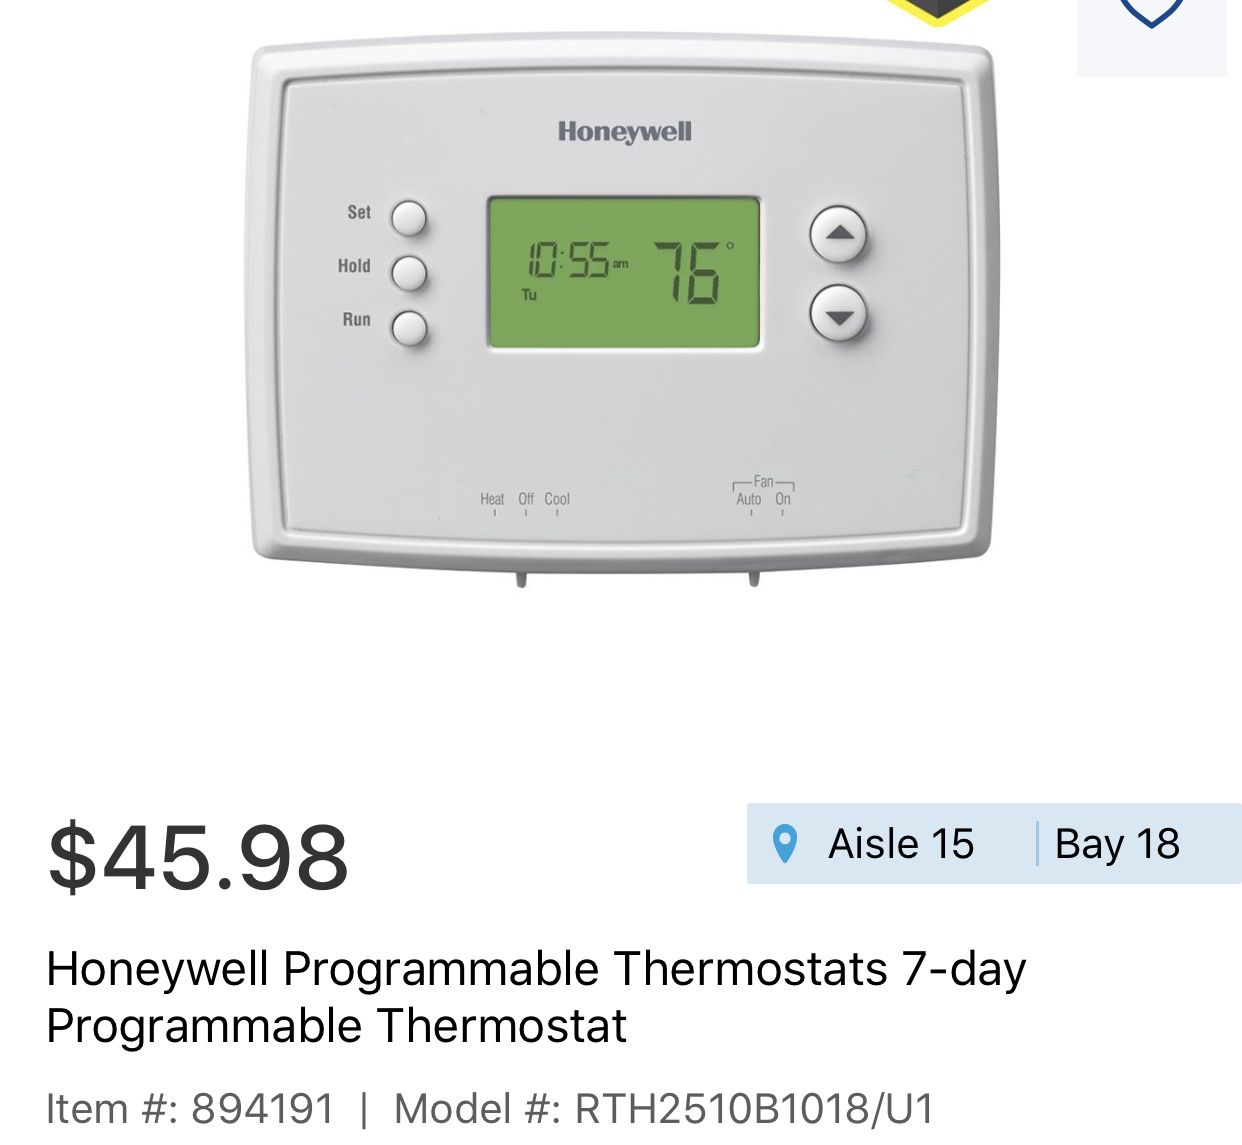 Honeywell Programmable Thermostat 7-day